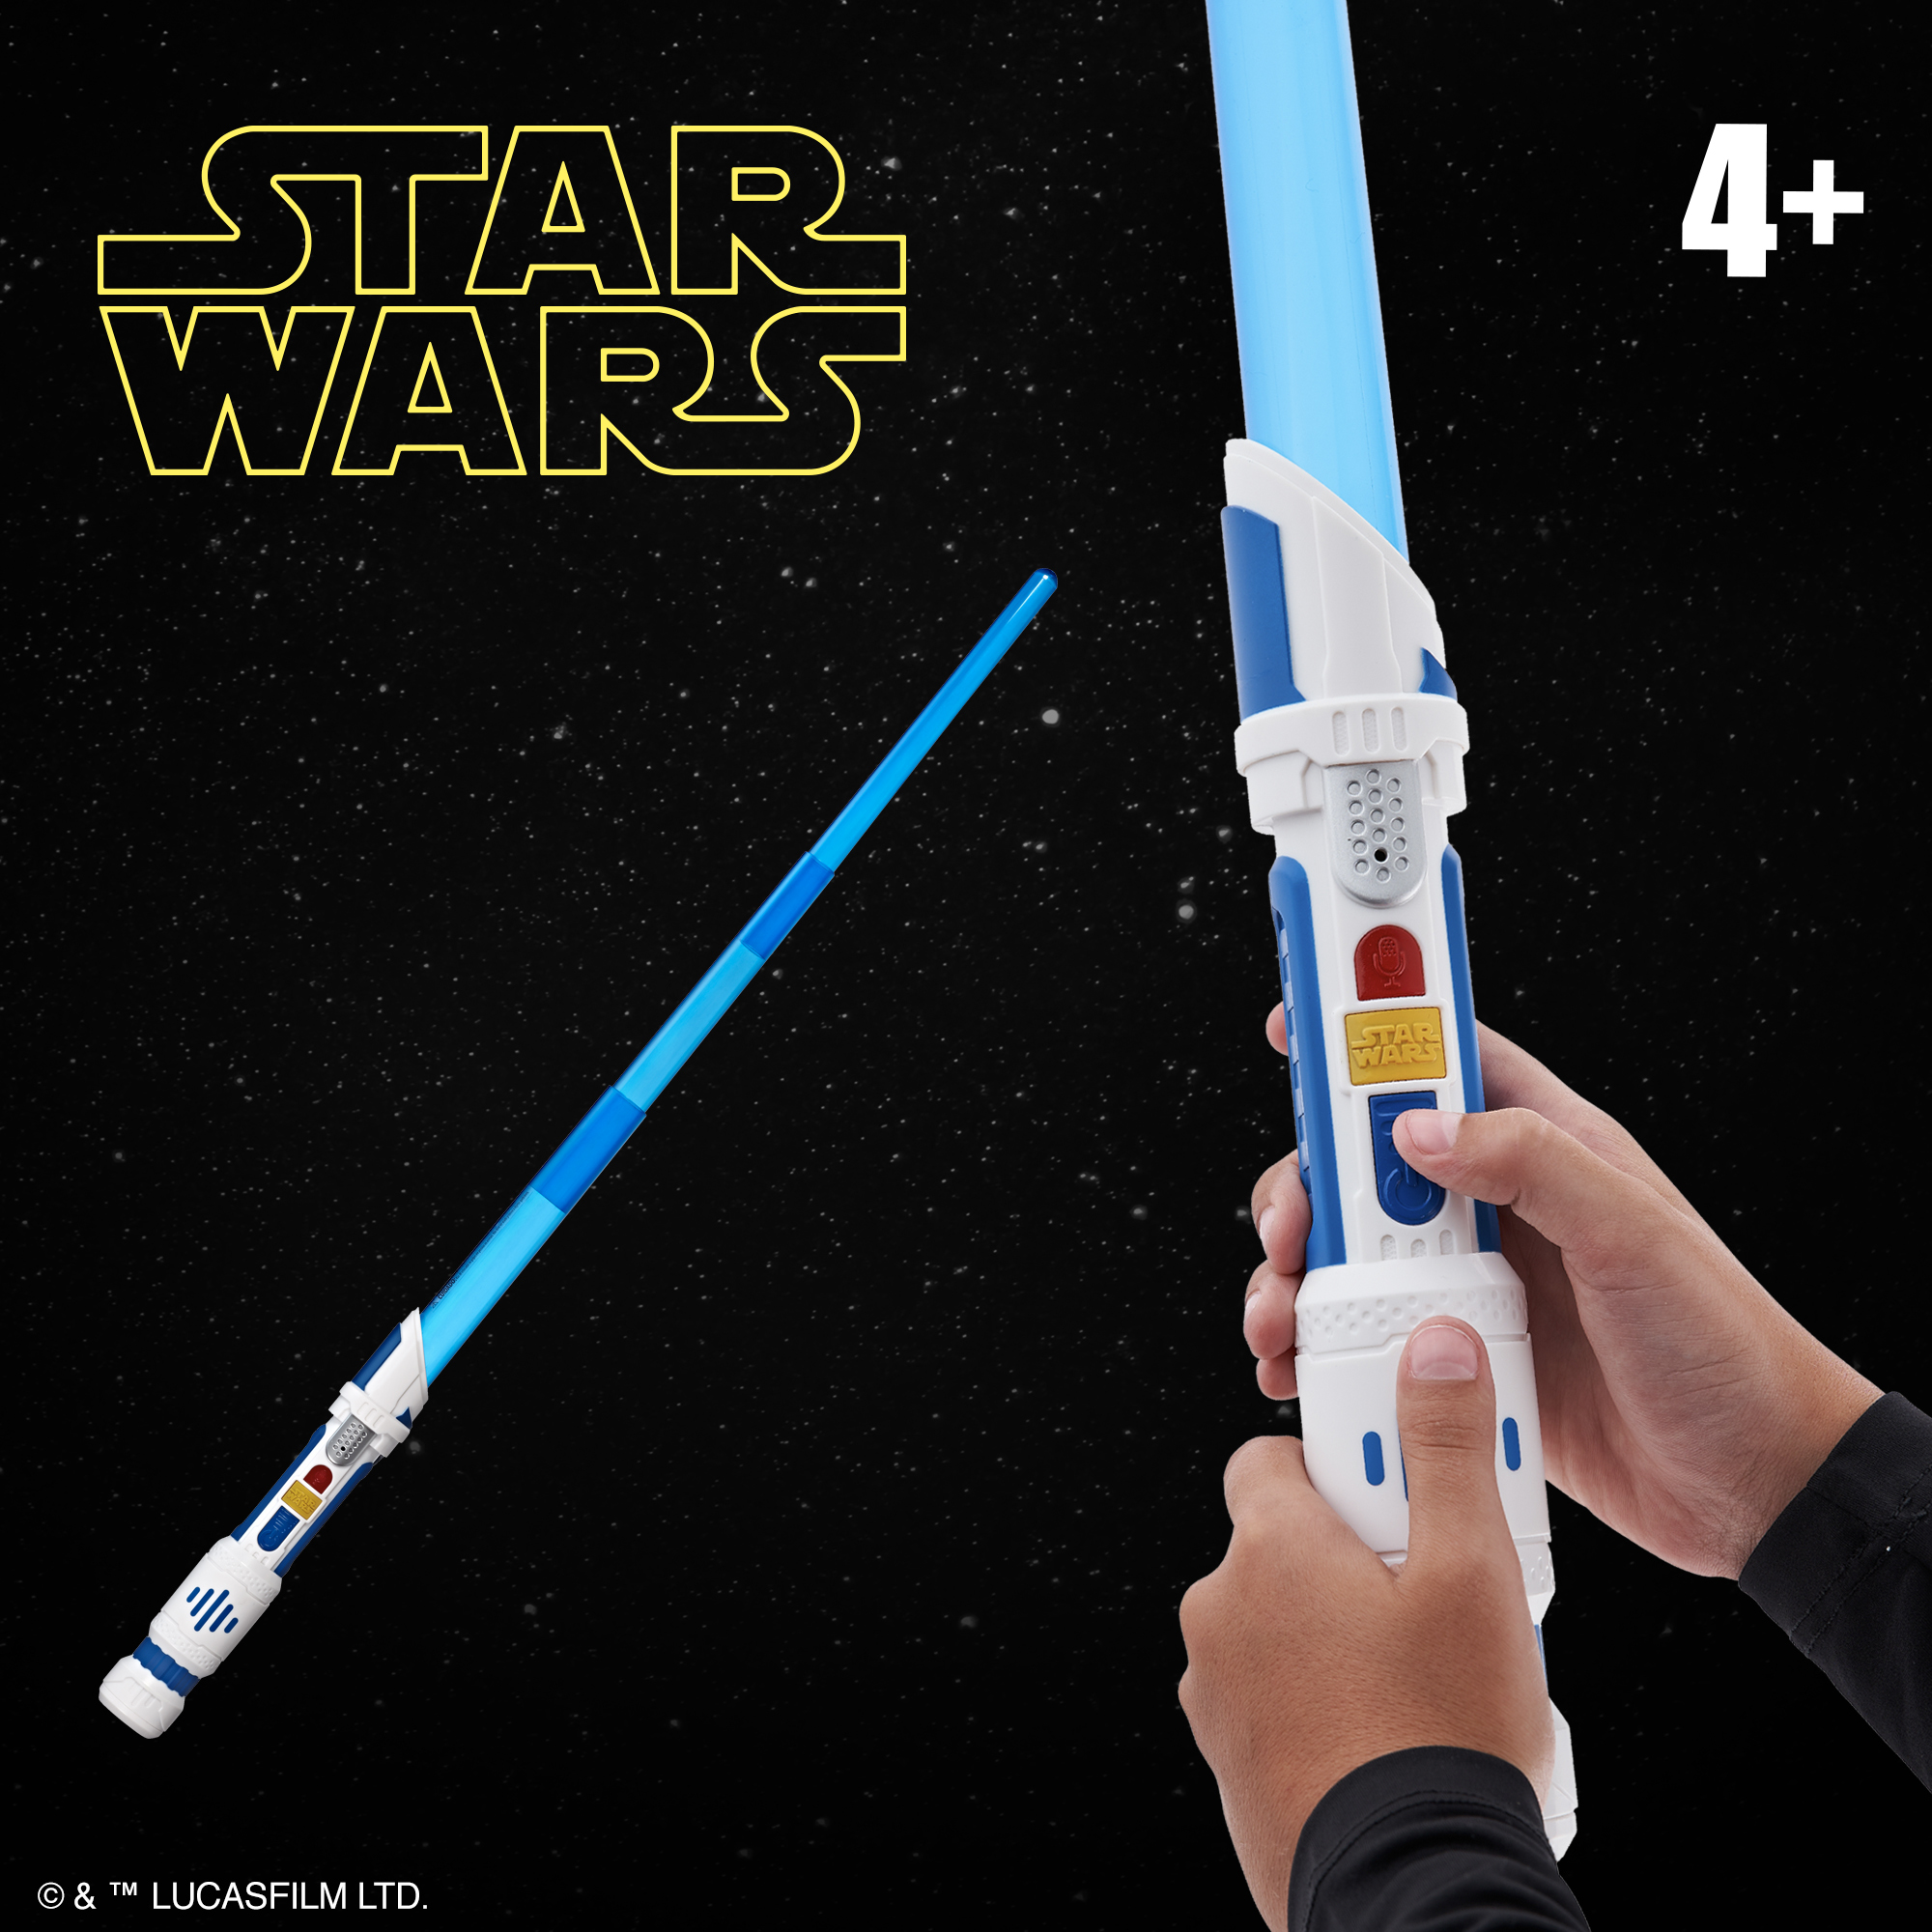 Star Wars Scream Saber Lightsaber Electronic Roleplay Toy - image 7 of 11